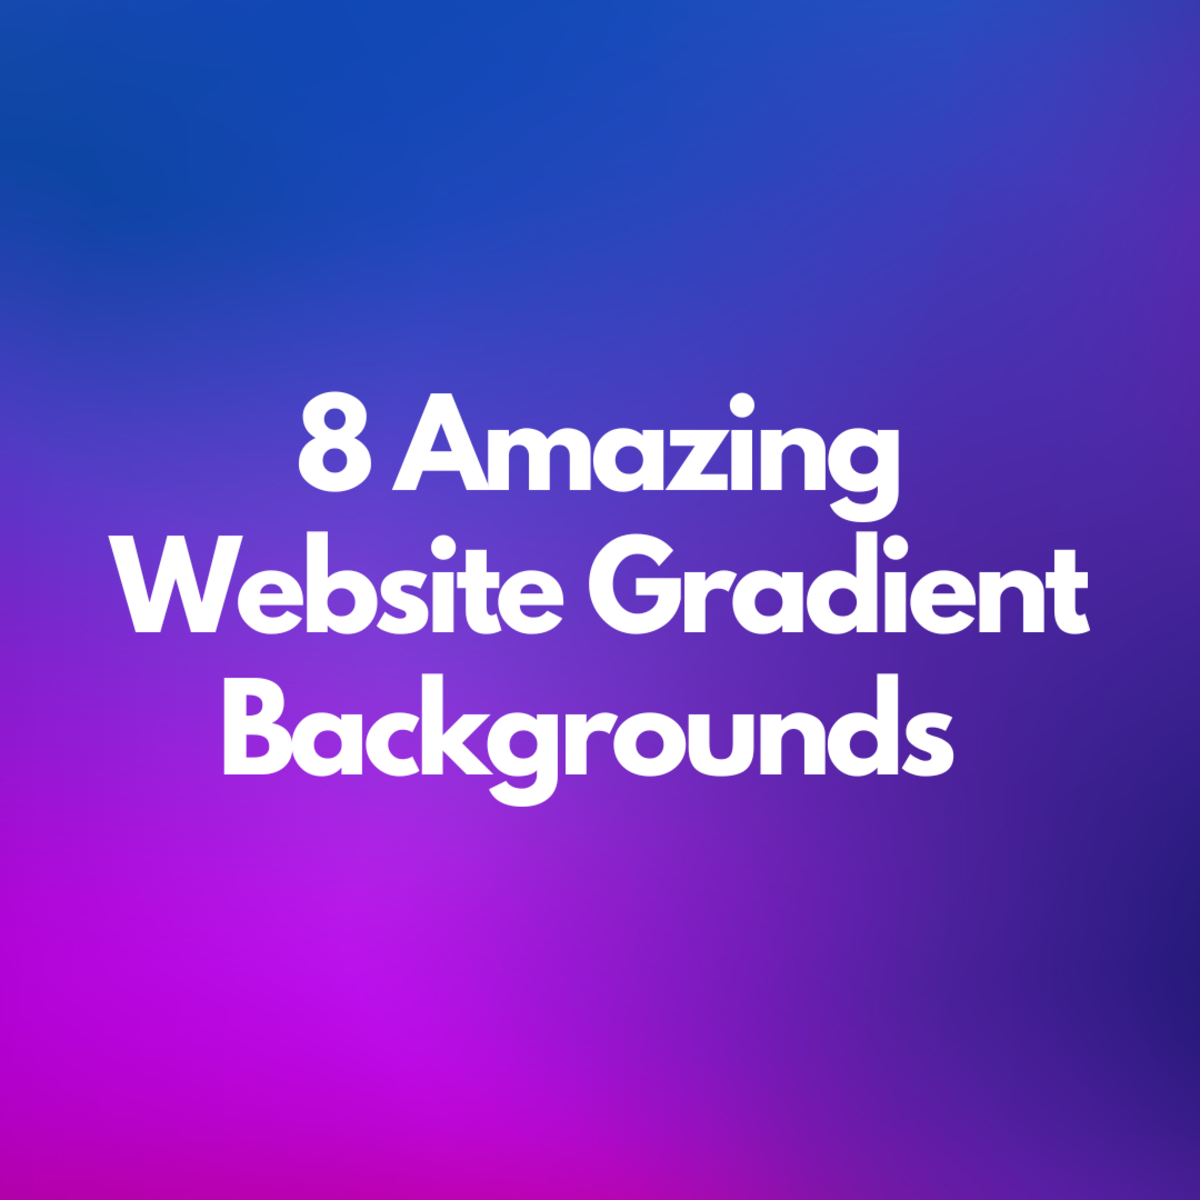 Discover lots of stunning website gradient backgrounds and useful tools in this ultimate list!